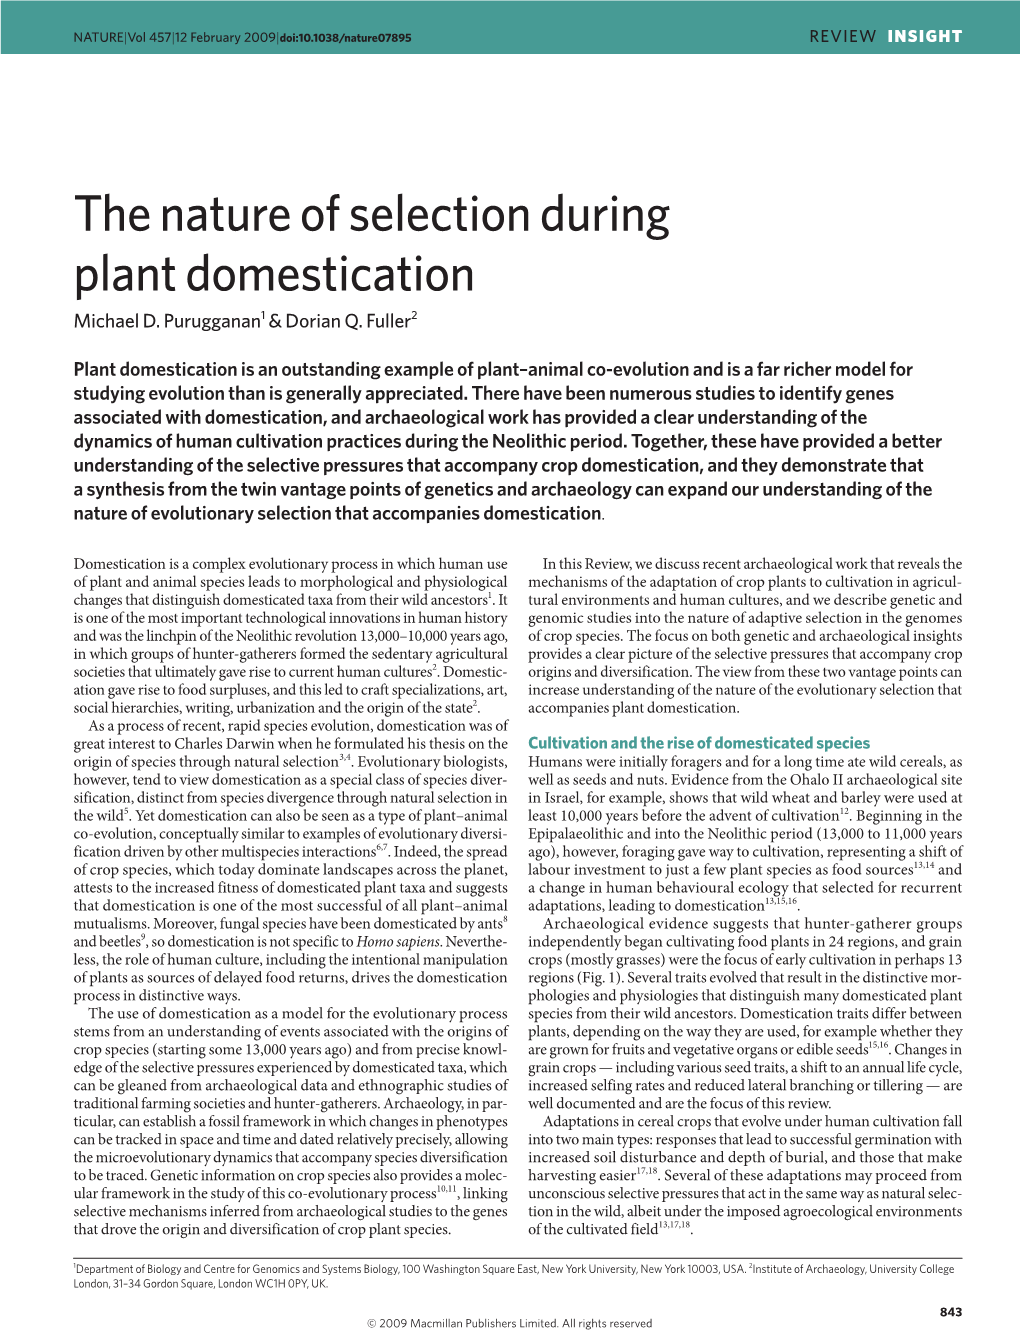 The Nature of Selection During Plant Domestication Michael D